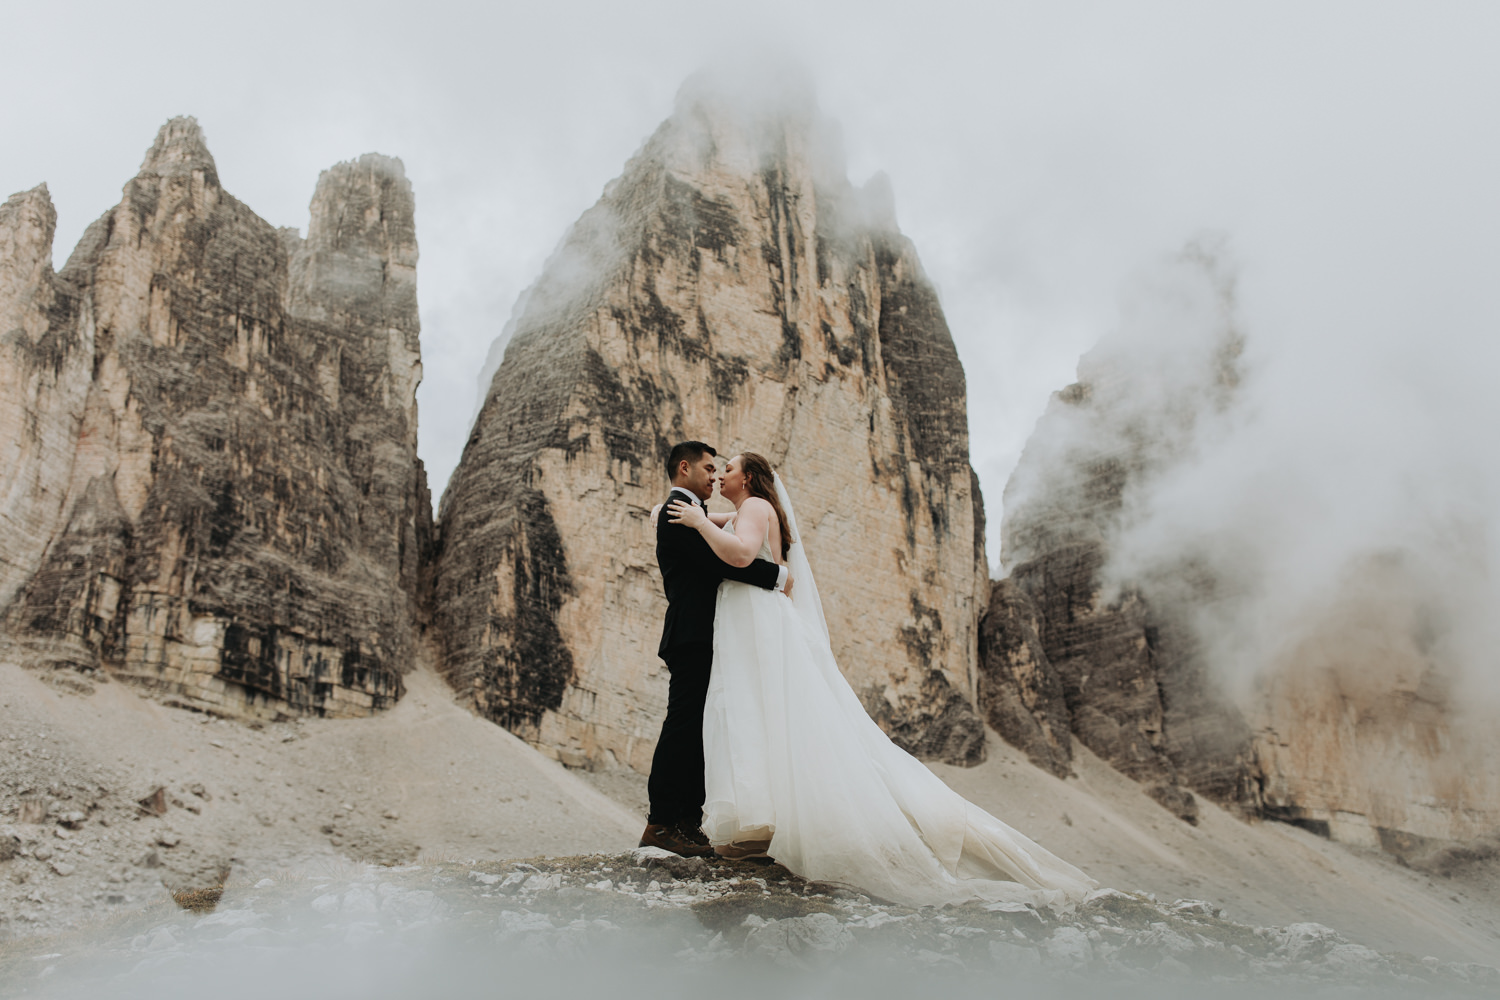 A couple stand in the middle of the frame embracing during their elopement. They are framed by the jagged, mist covered mountain peaks of Tre Cime in the Italian Dolomites. They are wearing a black tuxedo and white wedding dress.